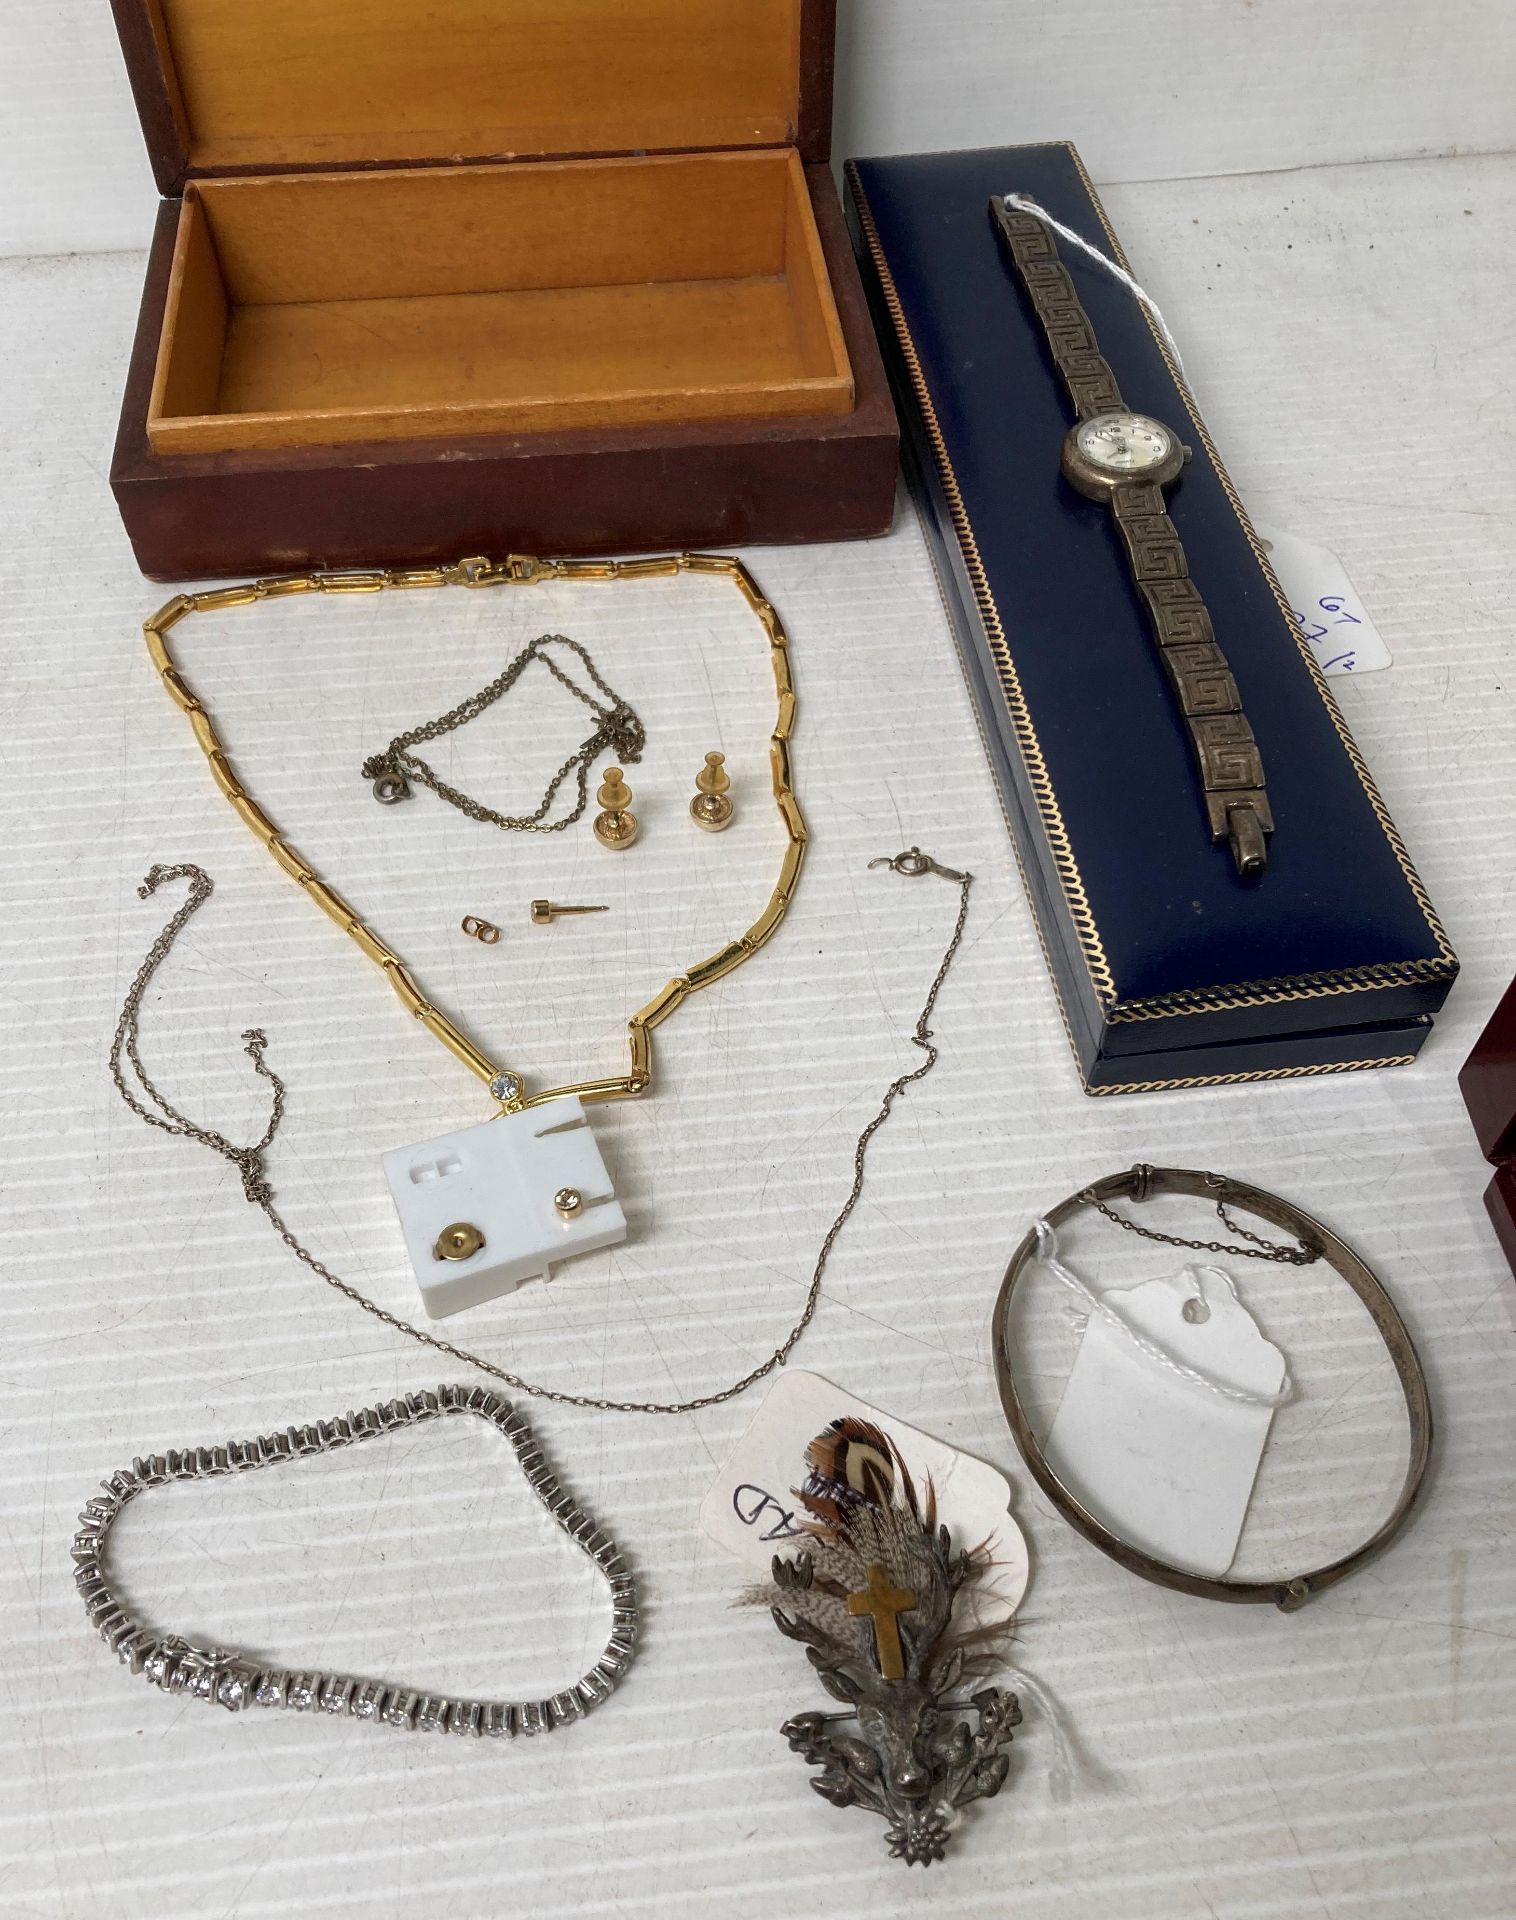 Contents to box and watch case - Sterling Silver (. - Image 6 of 8